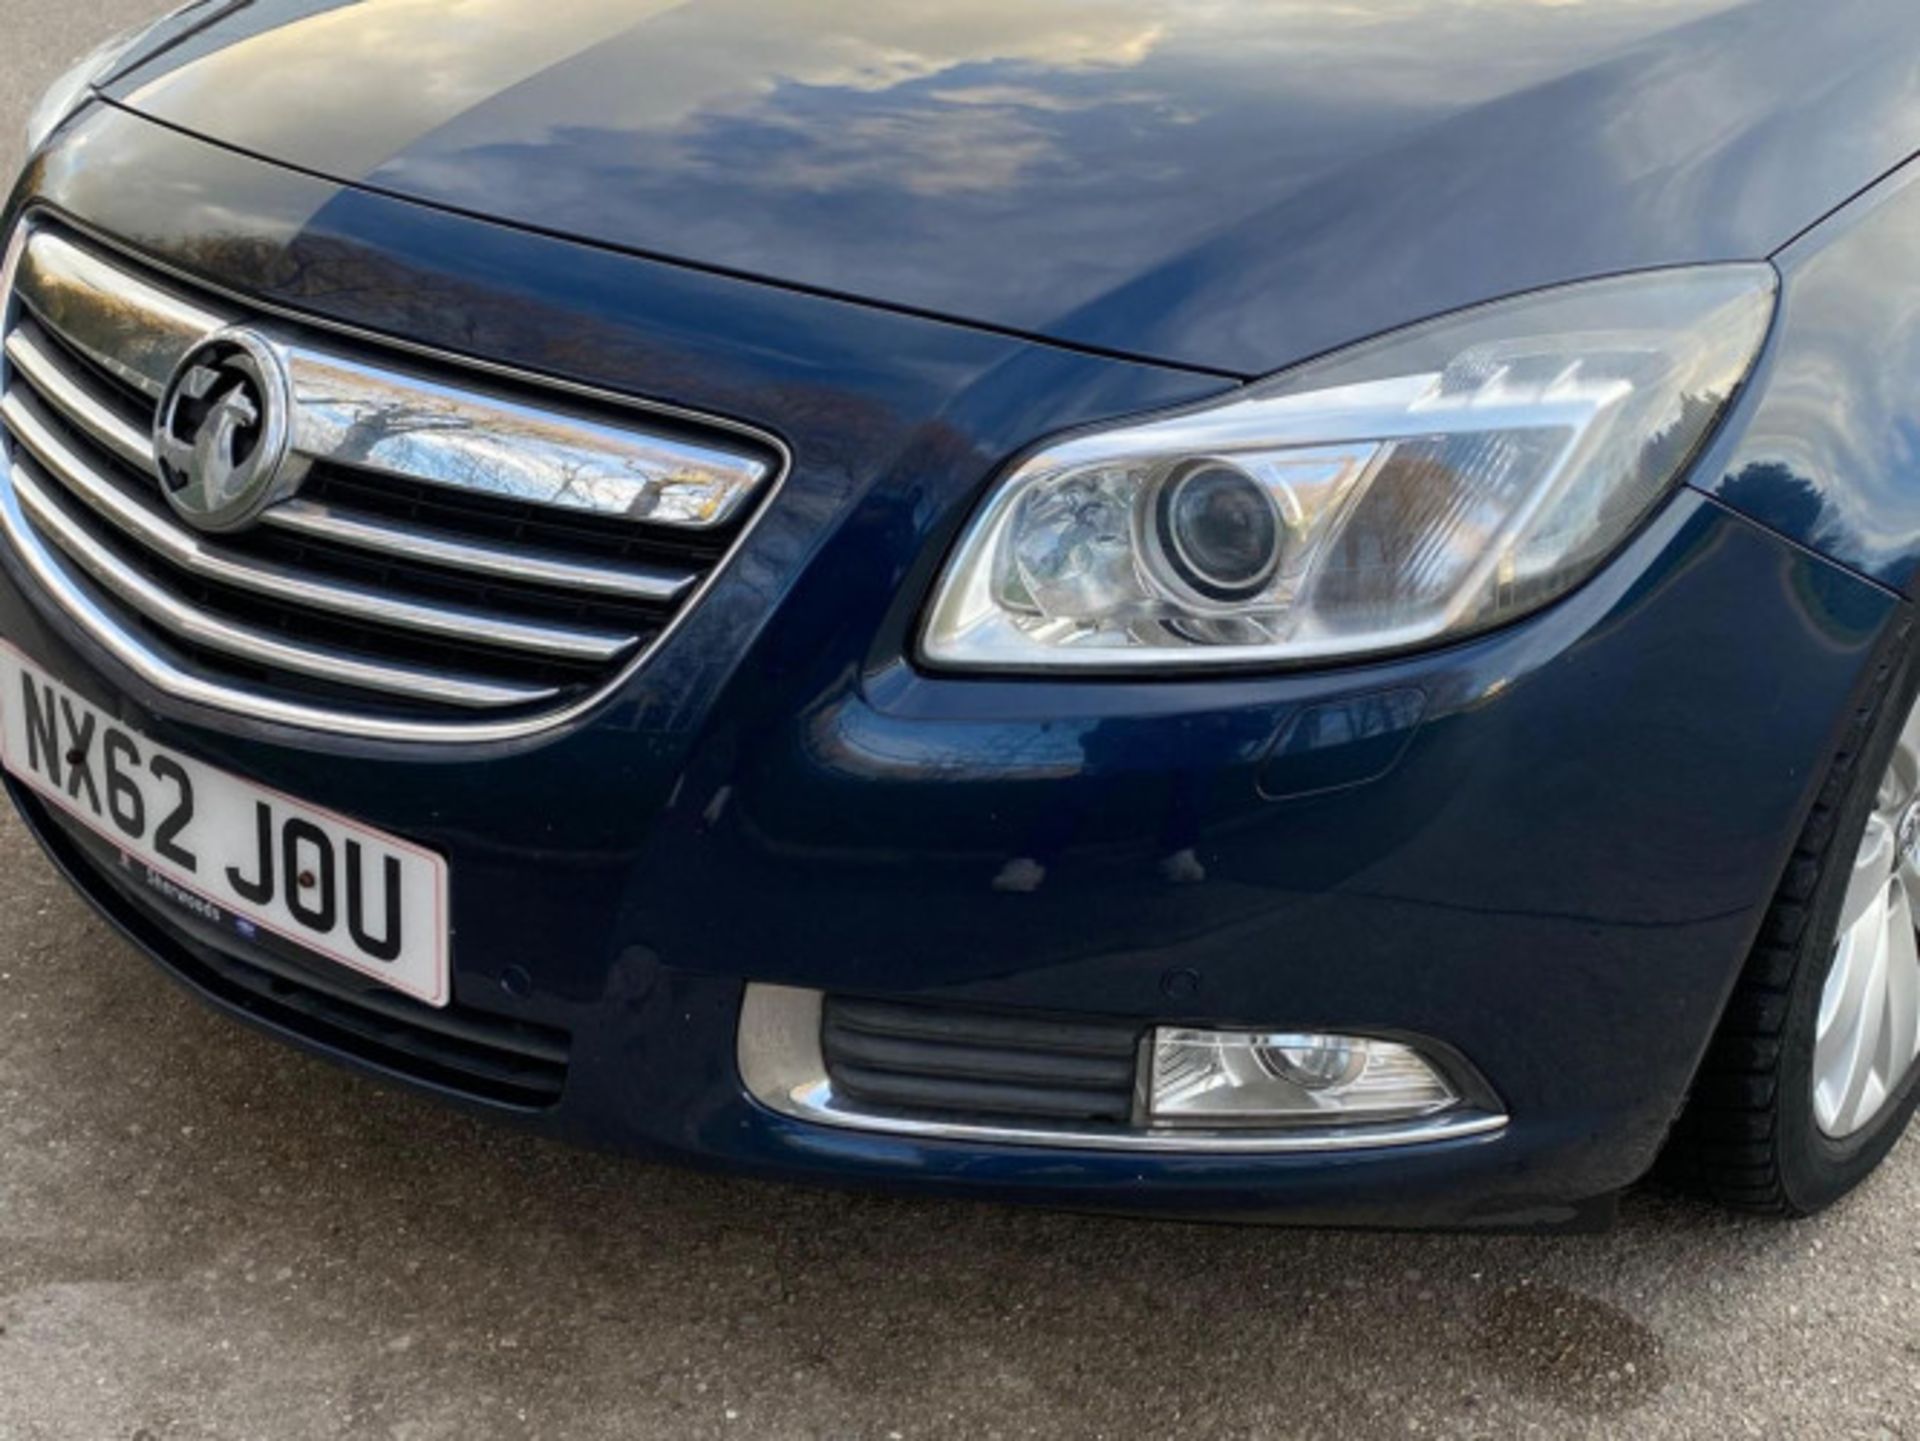 2012 VAUXHALL INSIGNIA 2.0 CDTI ELITE AUTO EURO 5 - DISCOVER EXCELLENCE >>--NO VAT ON HAMMER--<< - Image 108 of 120